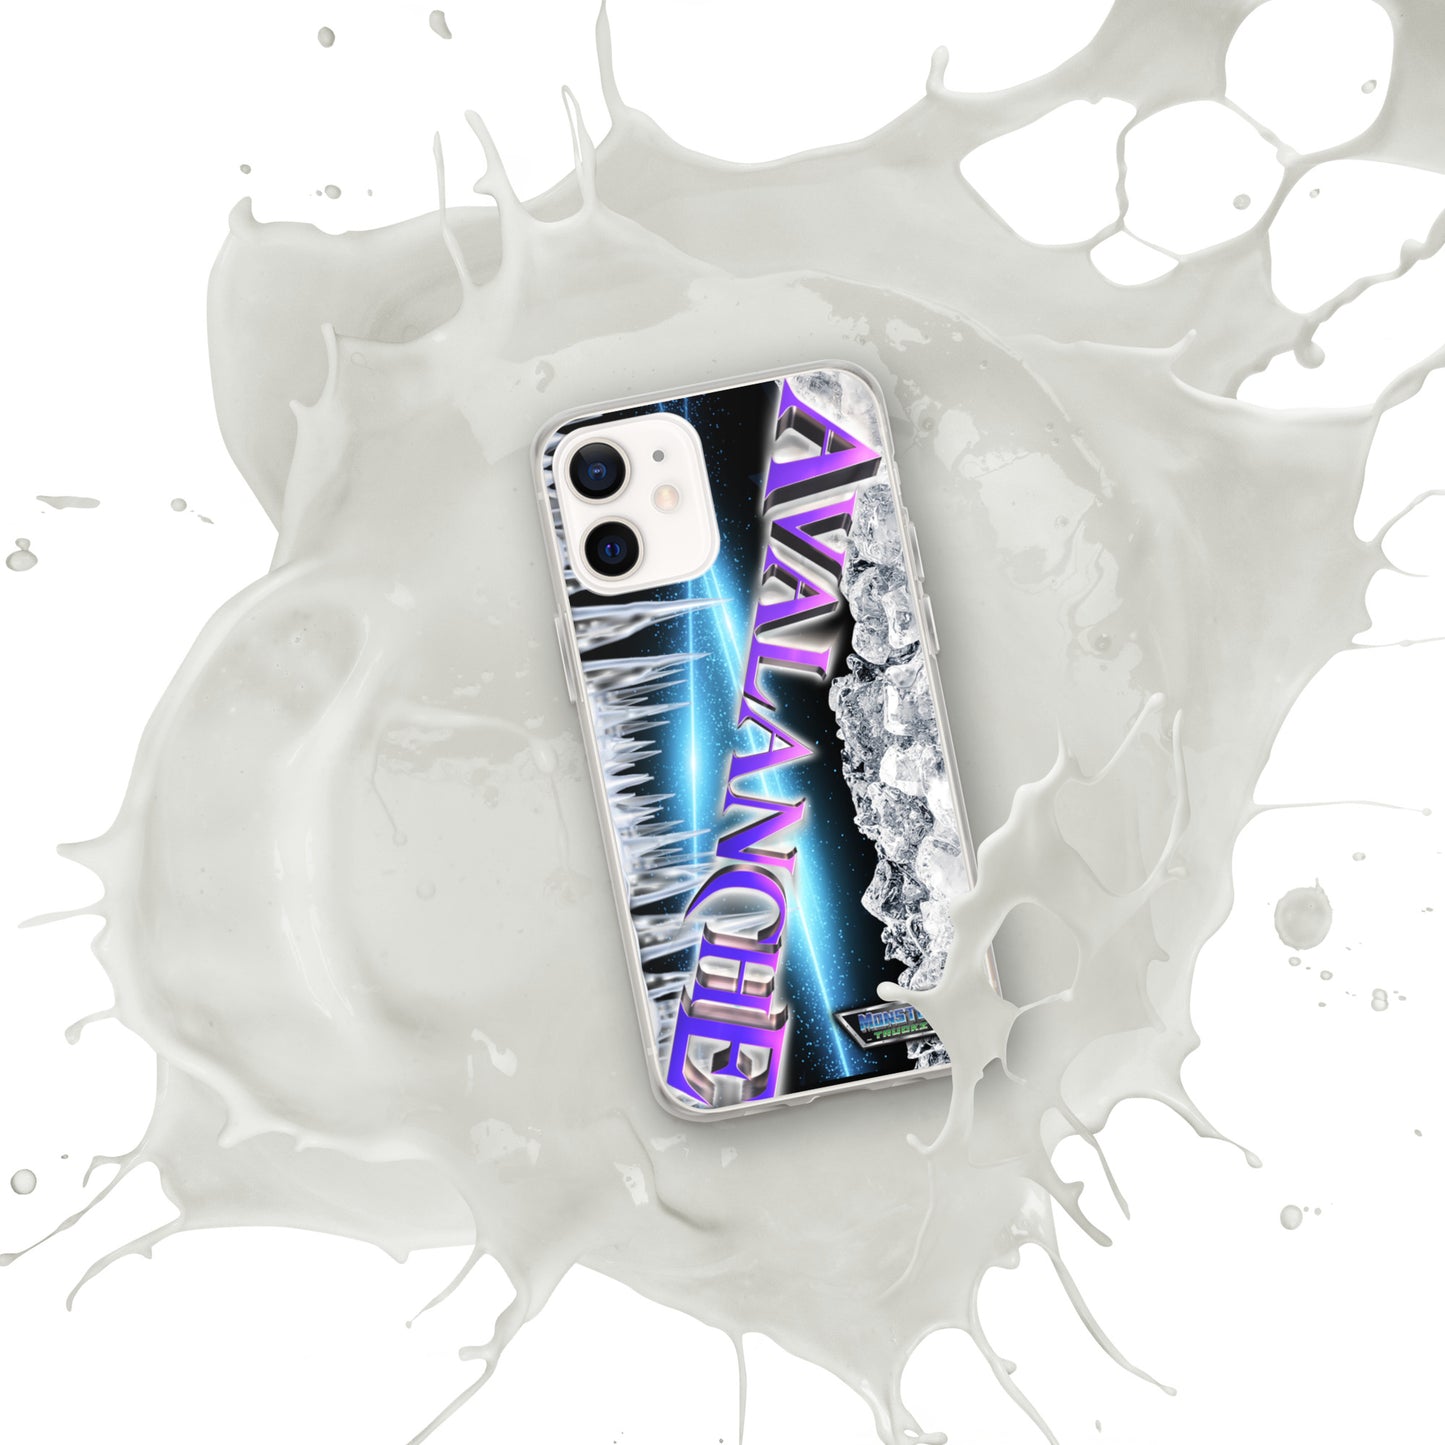 Avalanche iPhone Case